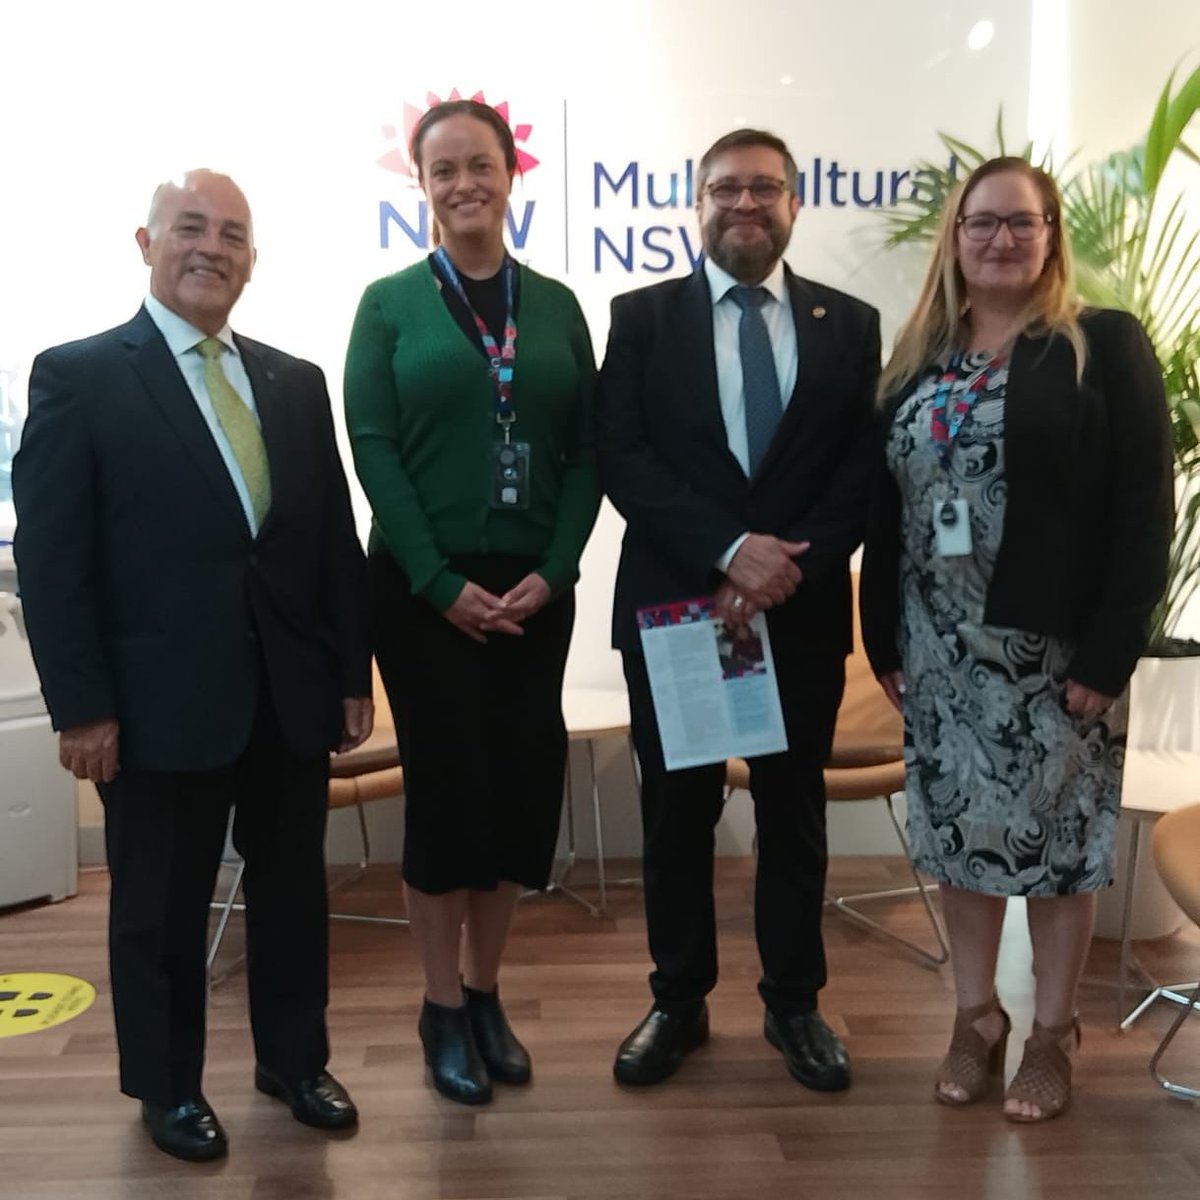 A sincere thank you to Breda Diamond & Katie Baird from Multicultural NSW, for receiving Amb Ernesto Céspedes as part of his official visit to the State. 🇲🇽🤝🇦🇺 Their work concerning language and integration services for the diversity of communities in NSW is highly commendable!